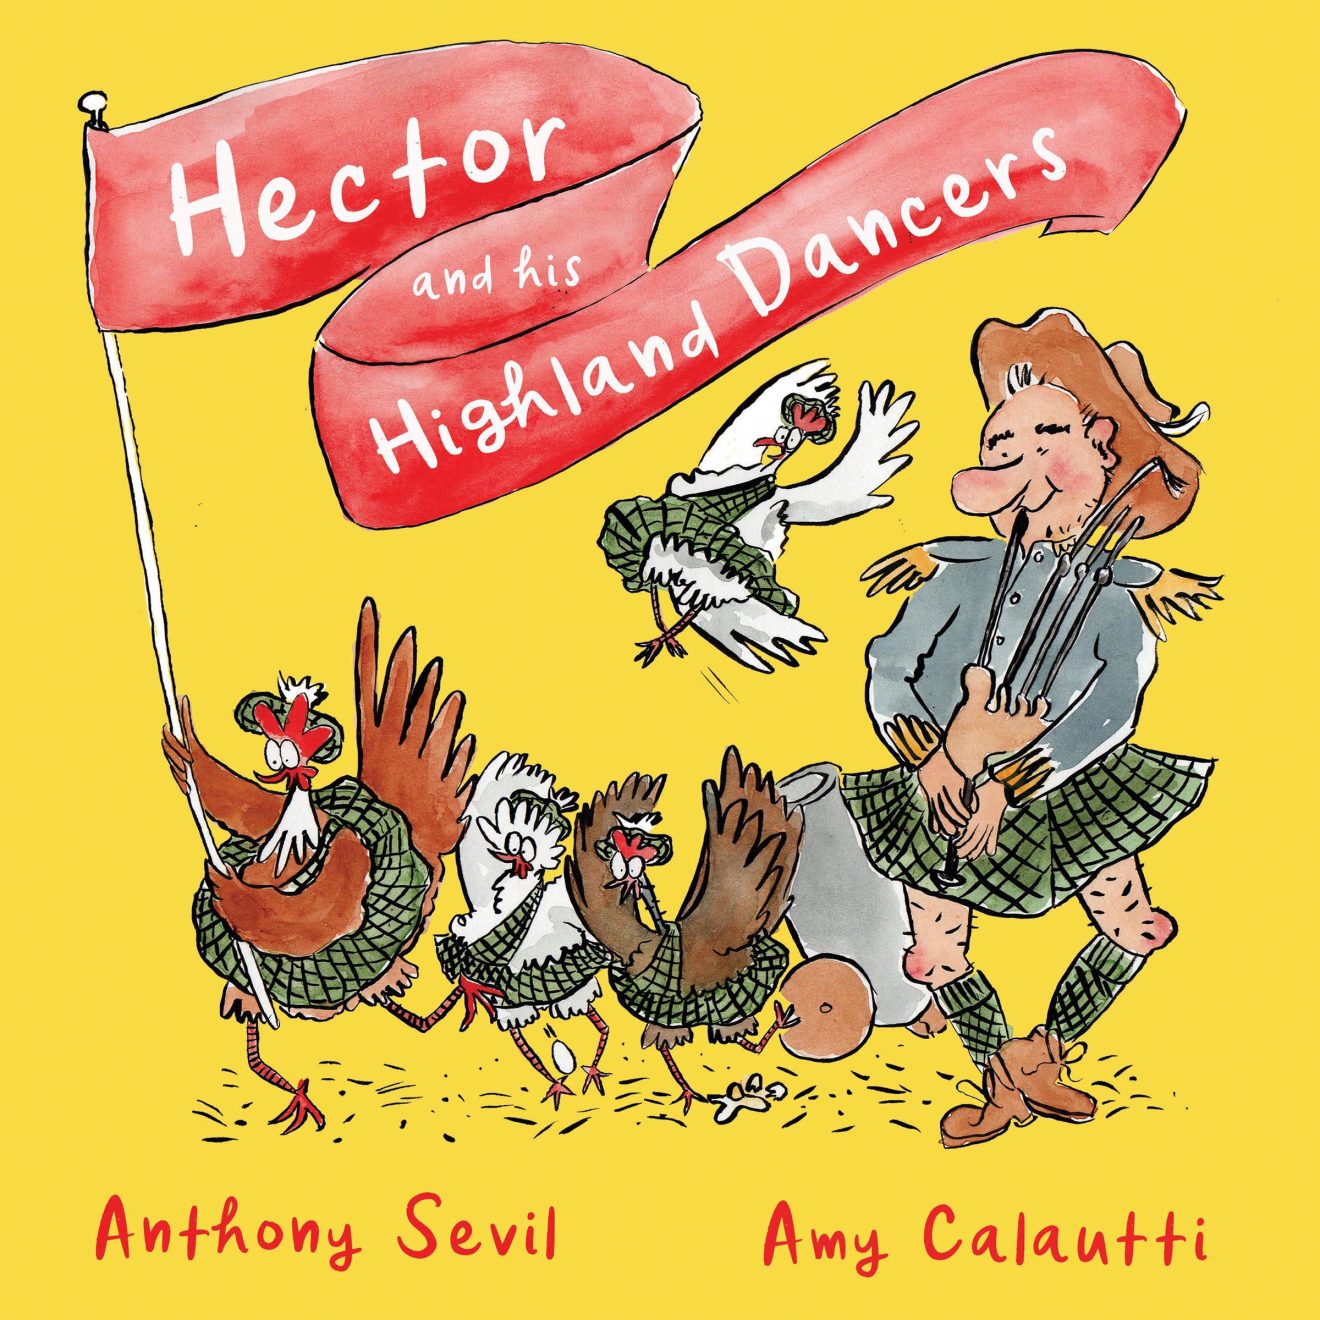 Hector and his Highland Dancers Cover